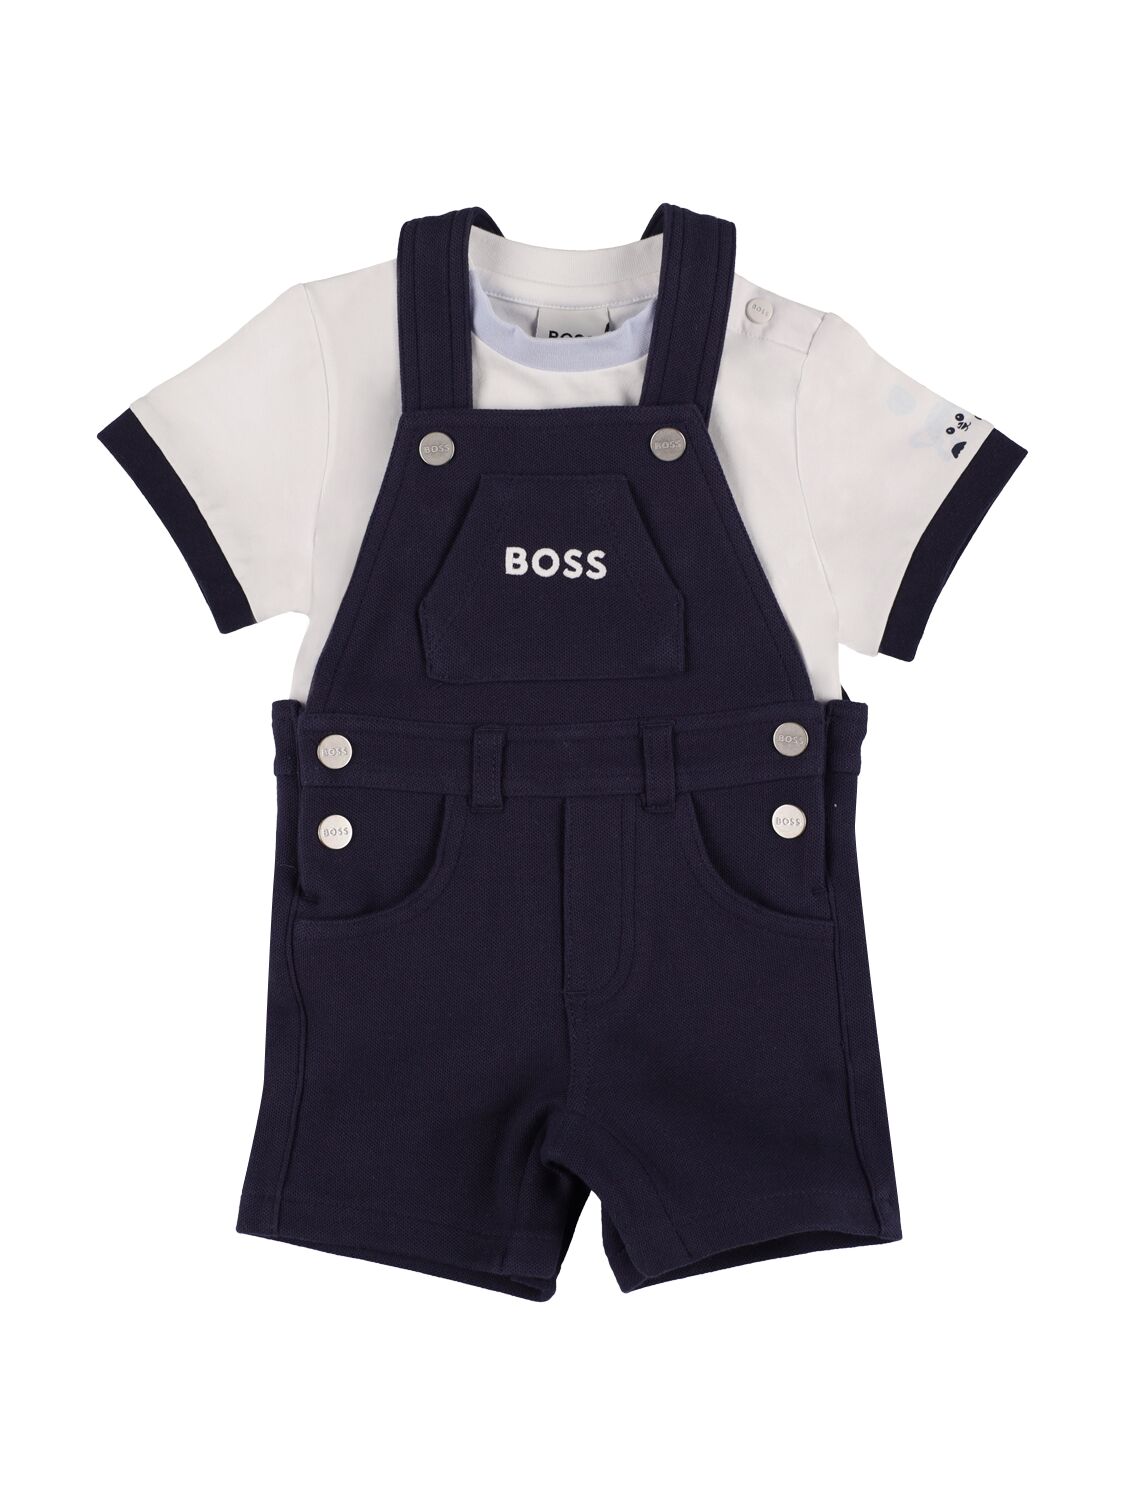 Hugo Boss Babies' Cotton Jersey T-shirt & Dungarees In Navy,white